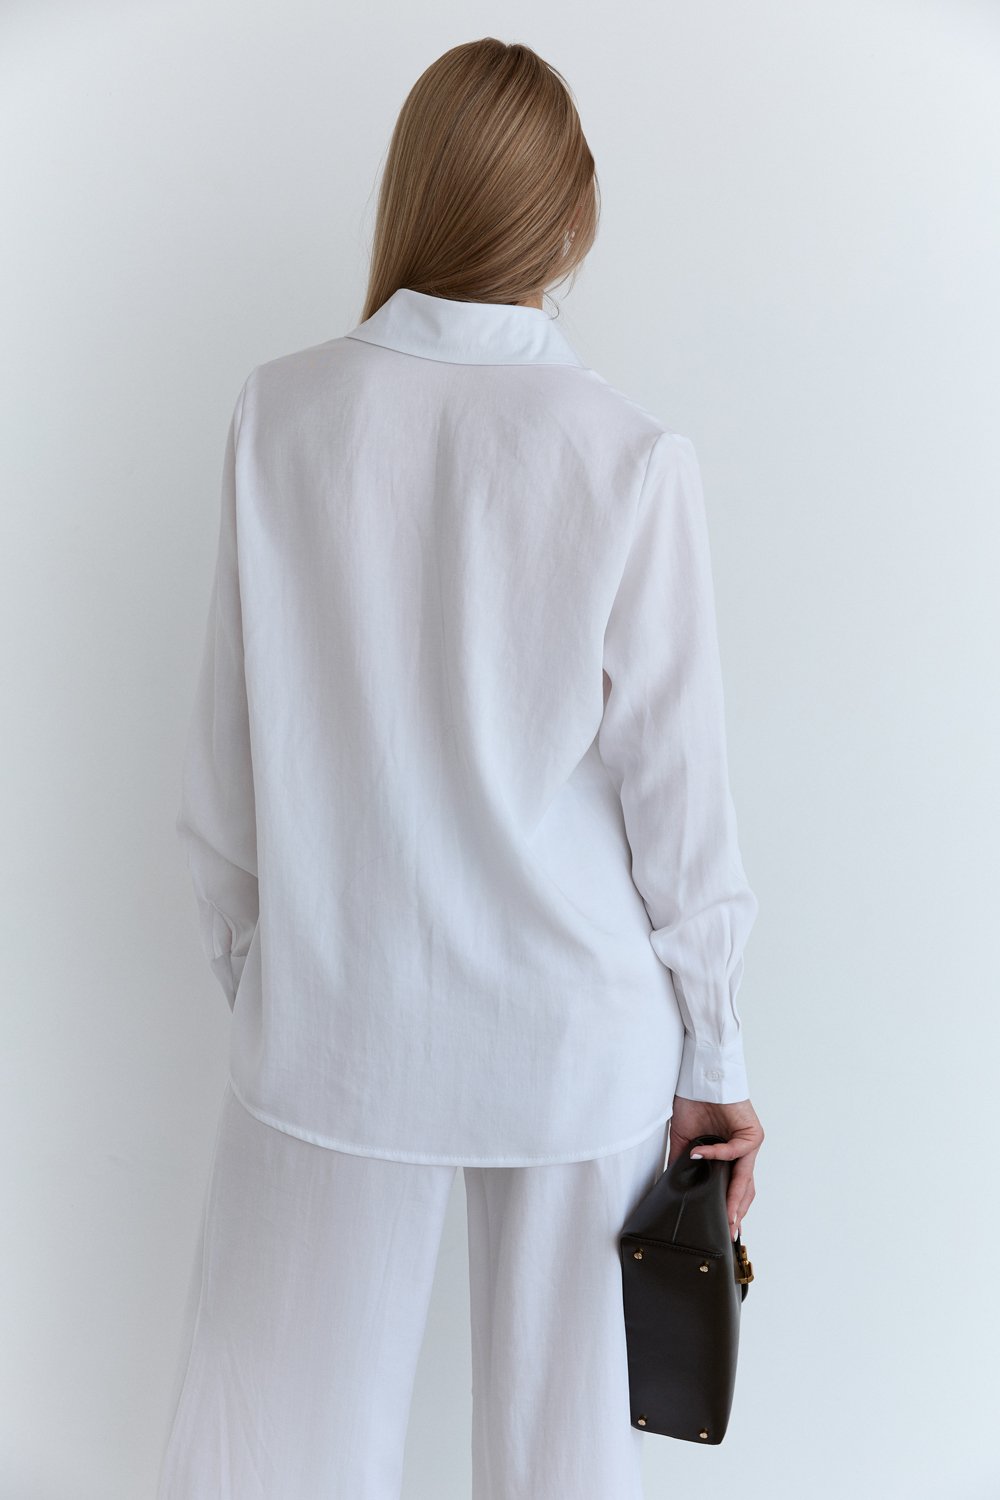 White loose-fitting blouse